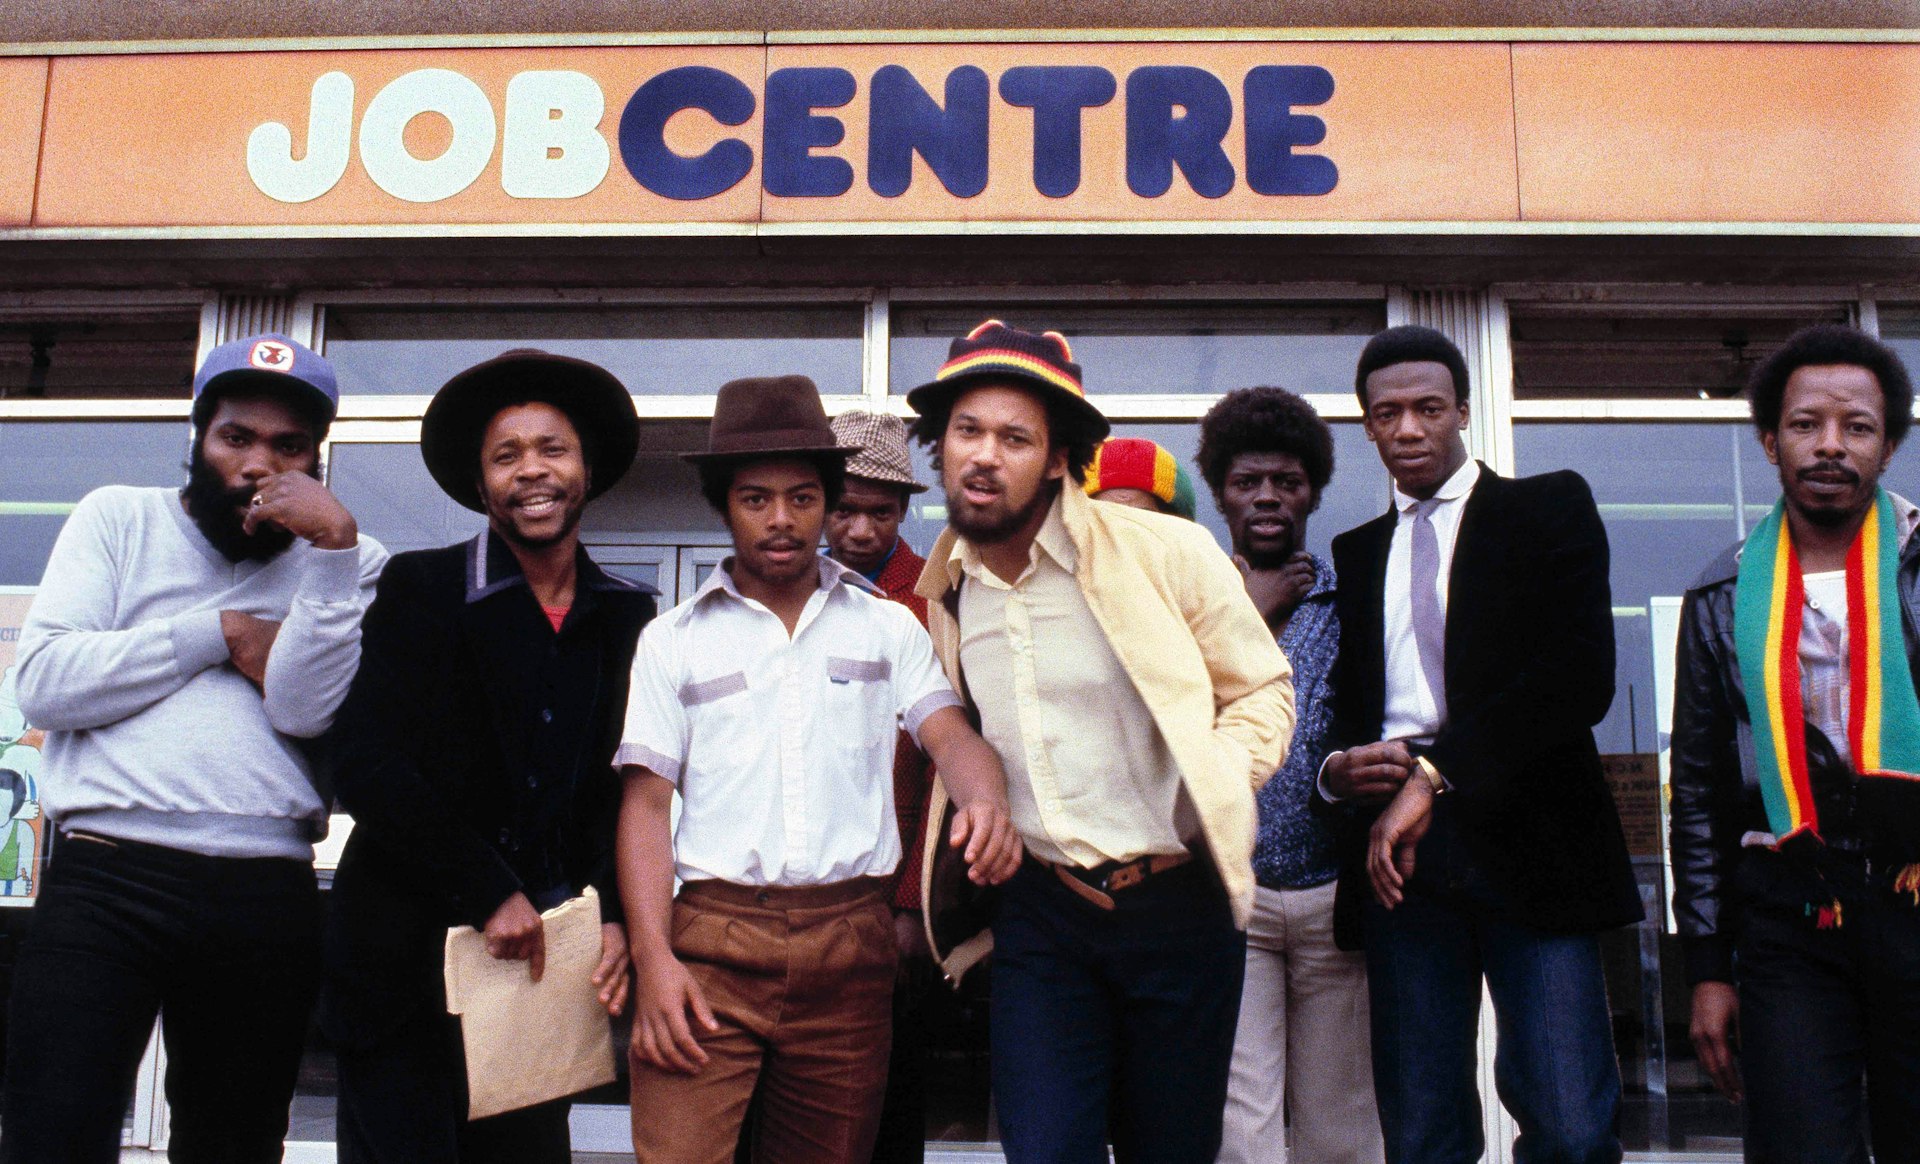 A visual history of reggae culture in the UK